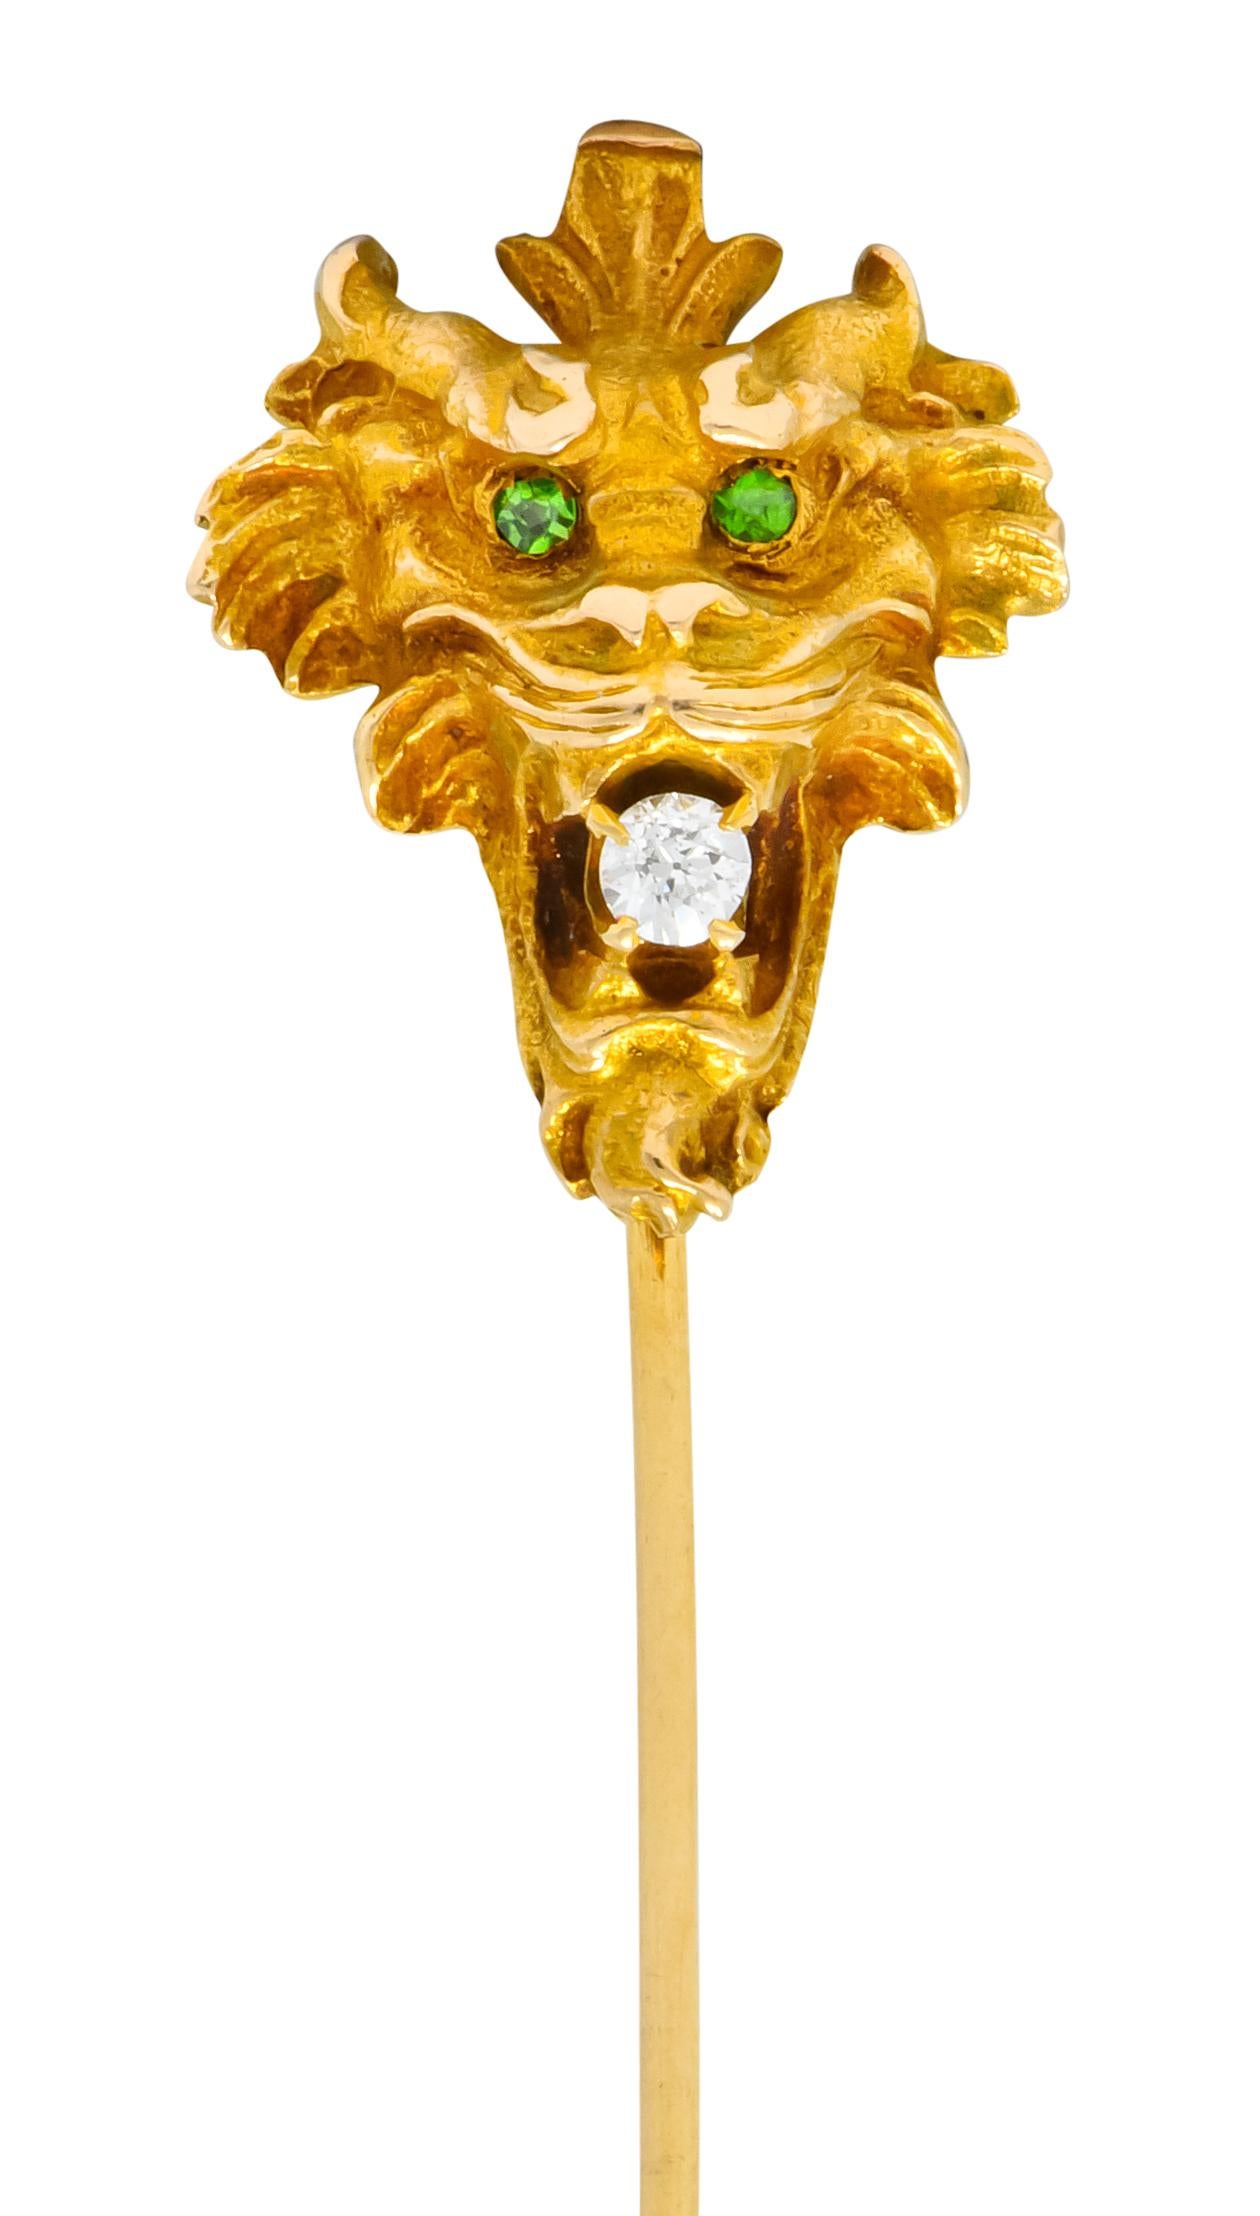 Depicting a snarling tiger face with stylized fur and a matte gold finish

Clutching in its jaws a transitional cut diamond weighing approximately 0.10 carat; eye-clean and white

Completed by two round cut demantoid garnet eyes; bright lime green